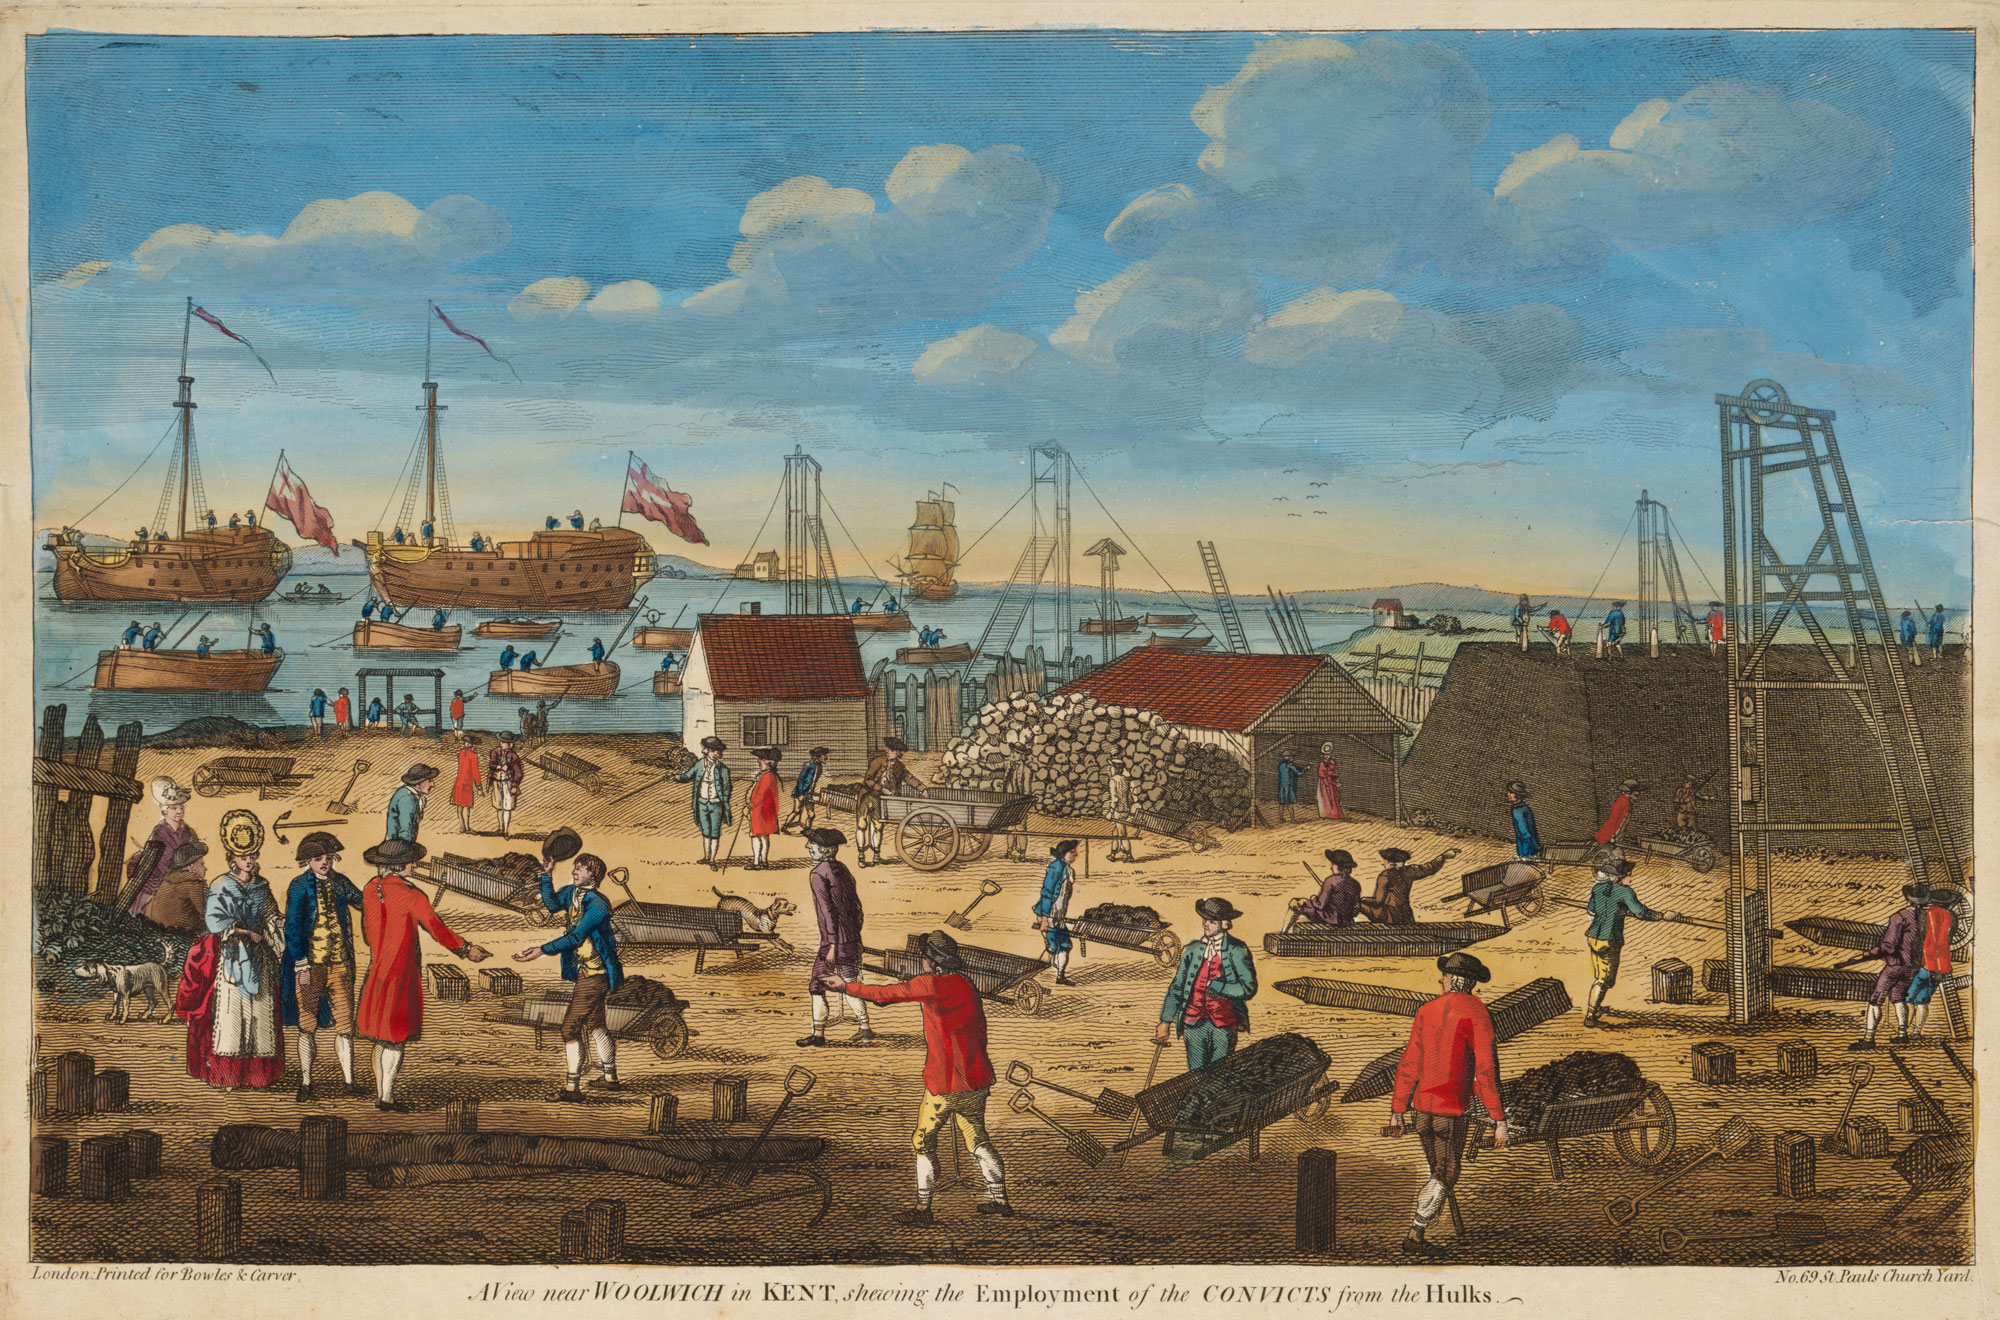 View near Woolwich in Kent shewing [sic] the employment of the convicts from the hulks’, about 1800.